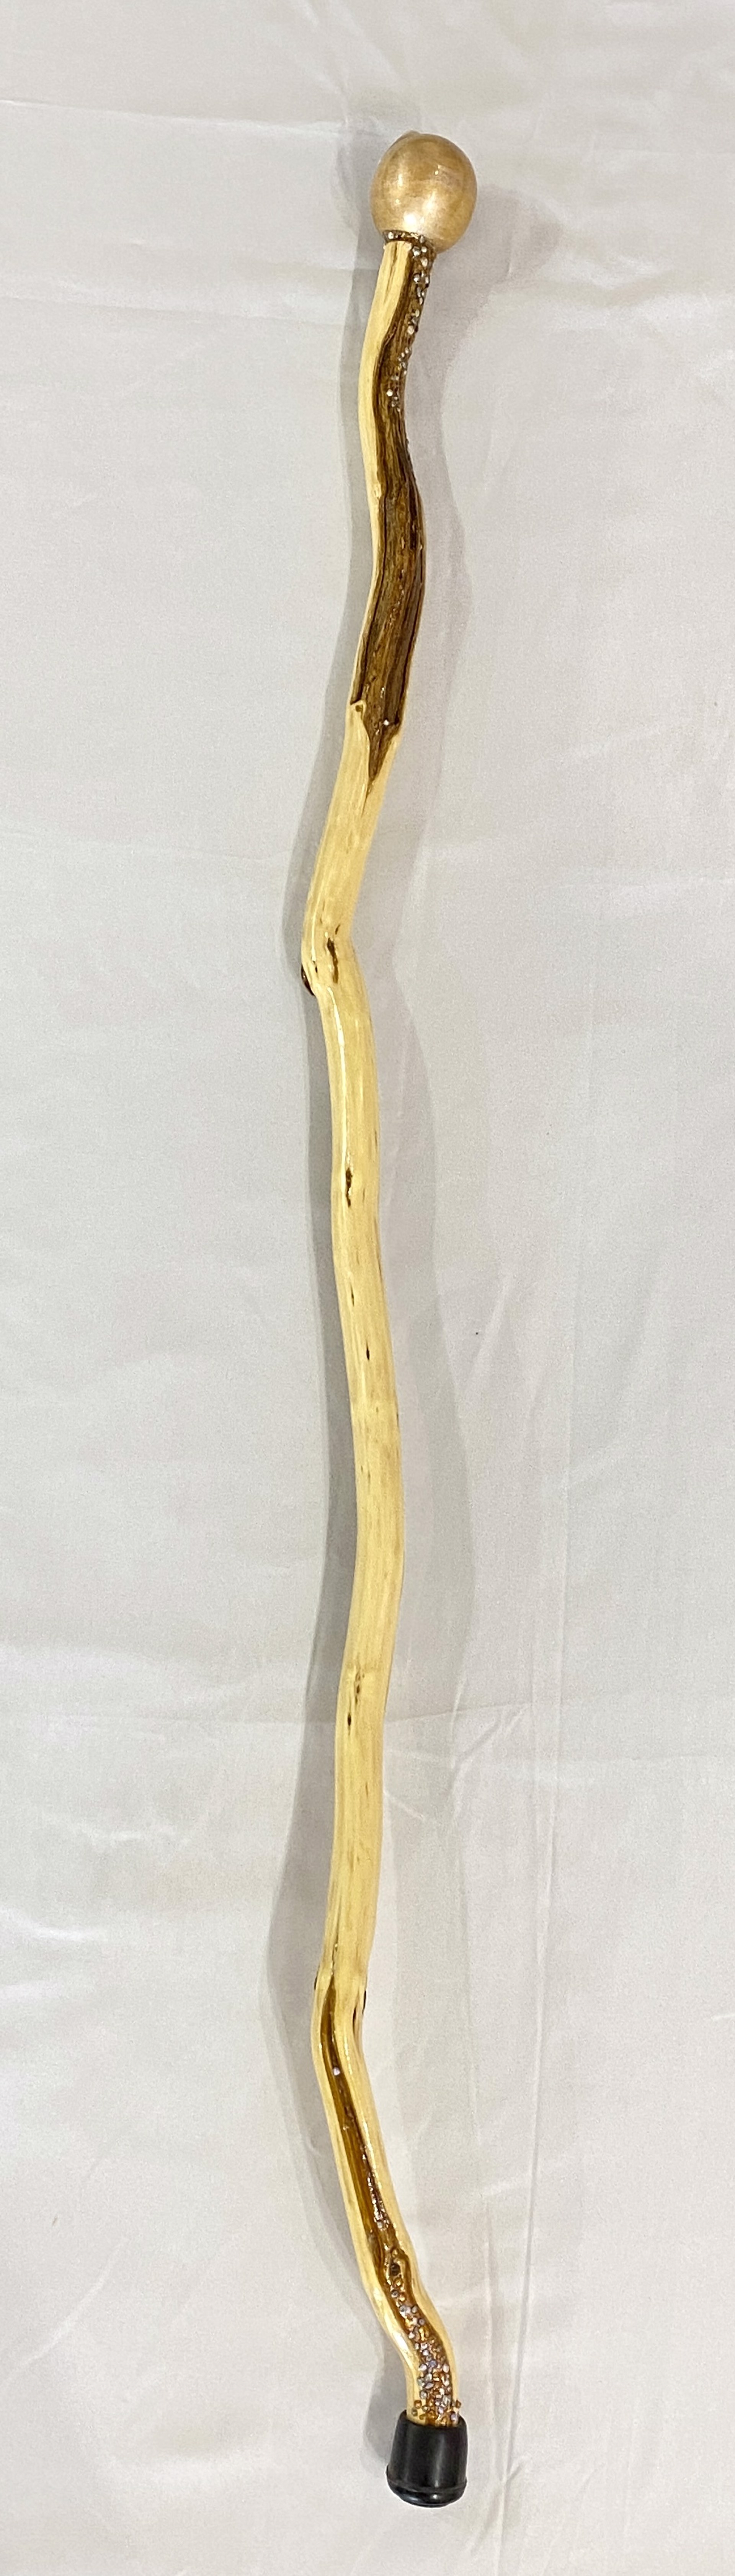 Wooden Walking Stick #3 by Kevin Foote